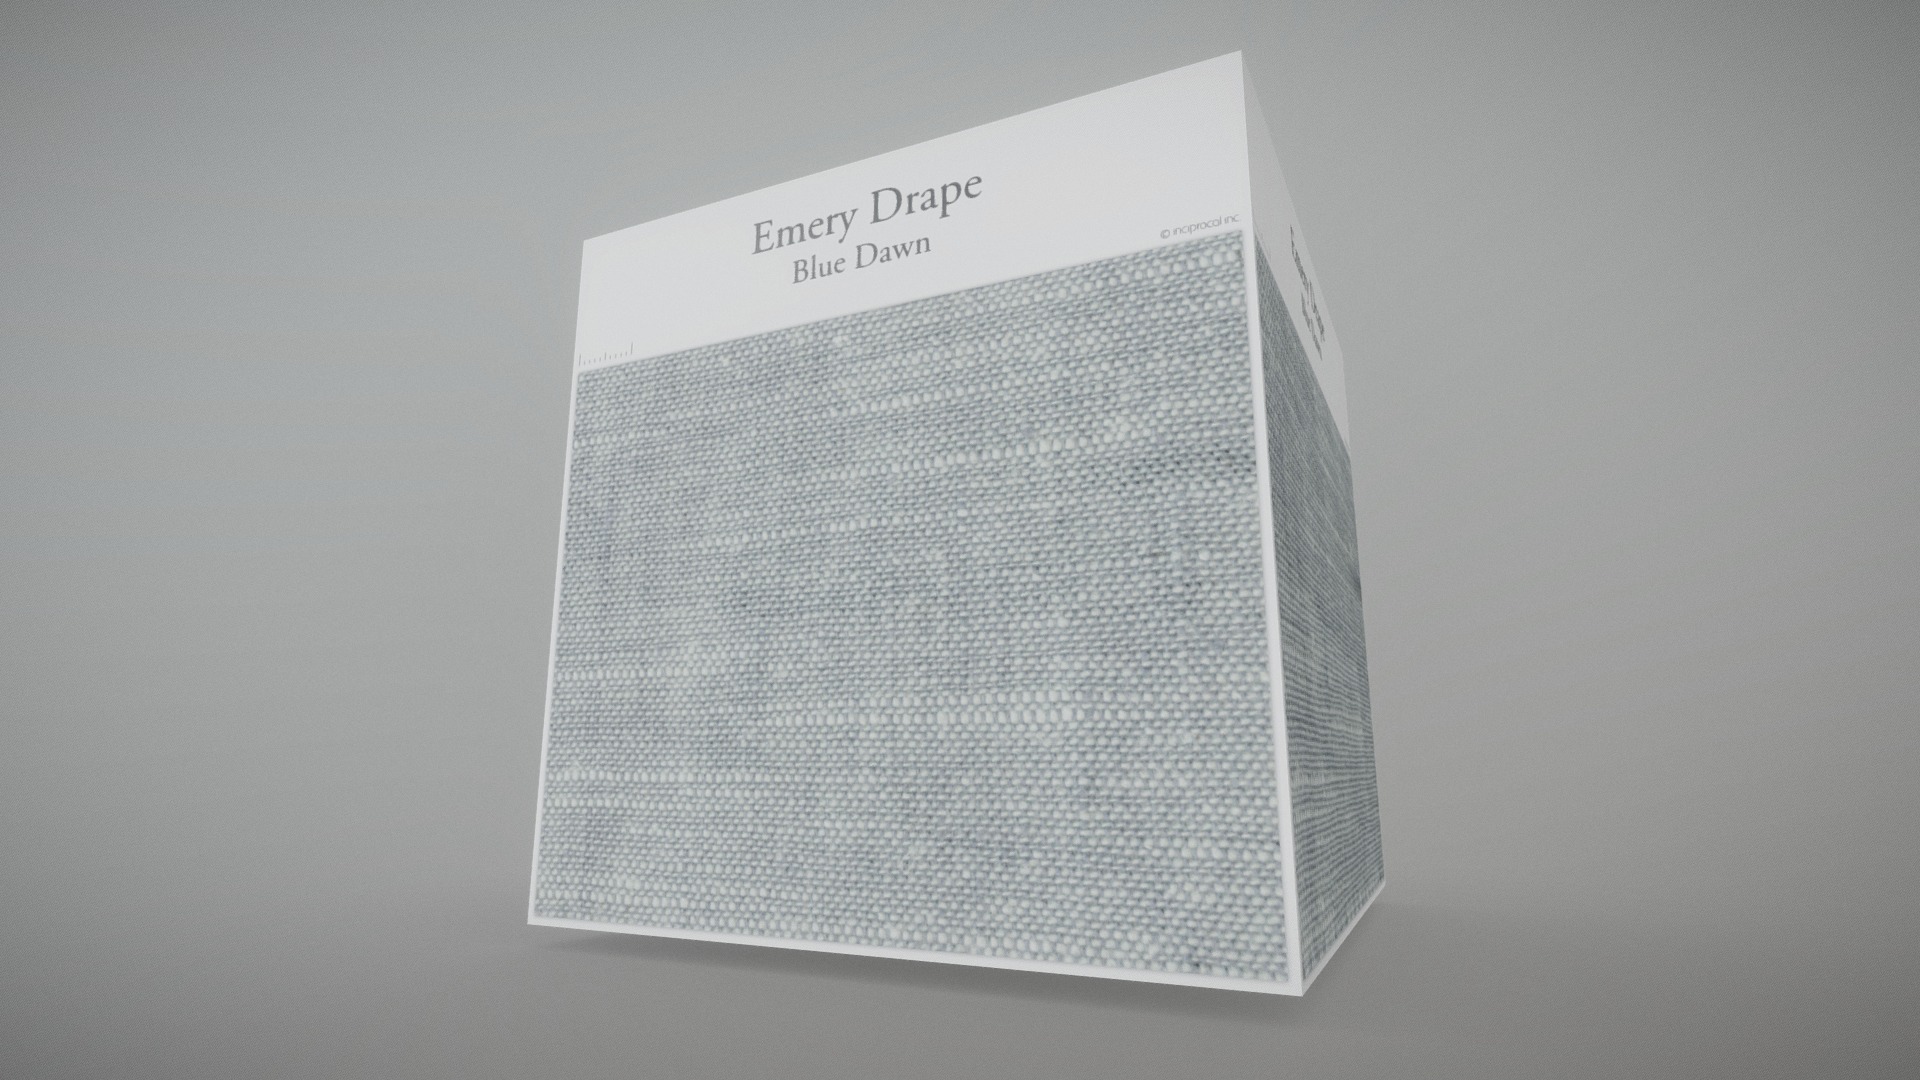 3D model Emery Drape (Blue Dawn) - This is a 3D model of the Emery Drape (Blue Dawn). The 3D model is about a book on a table.